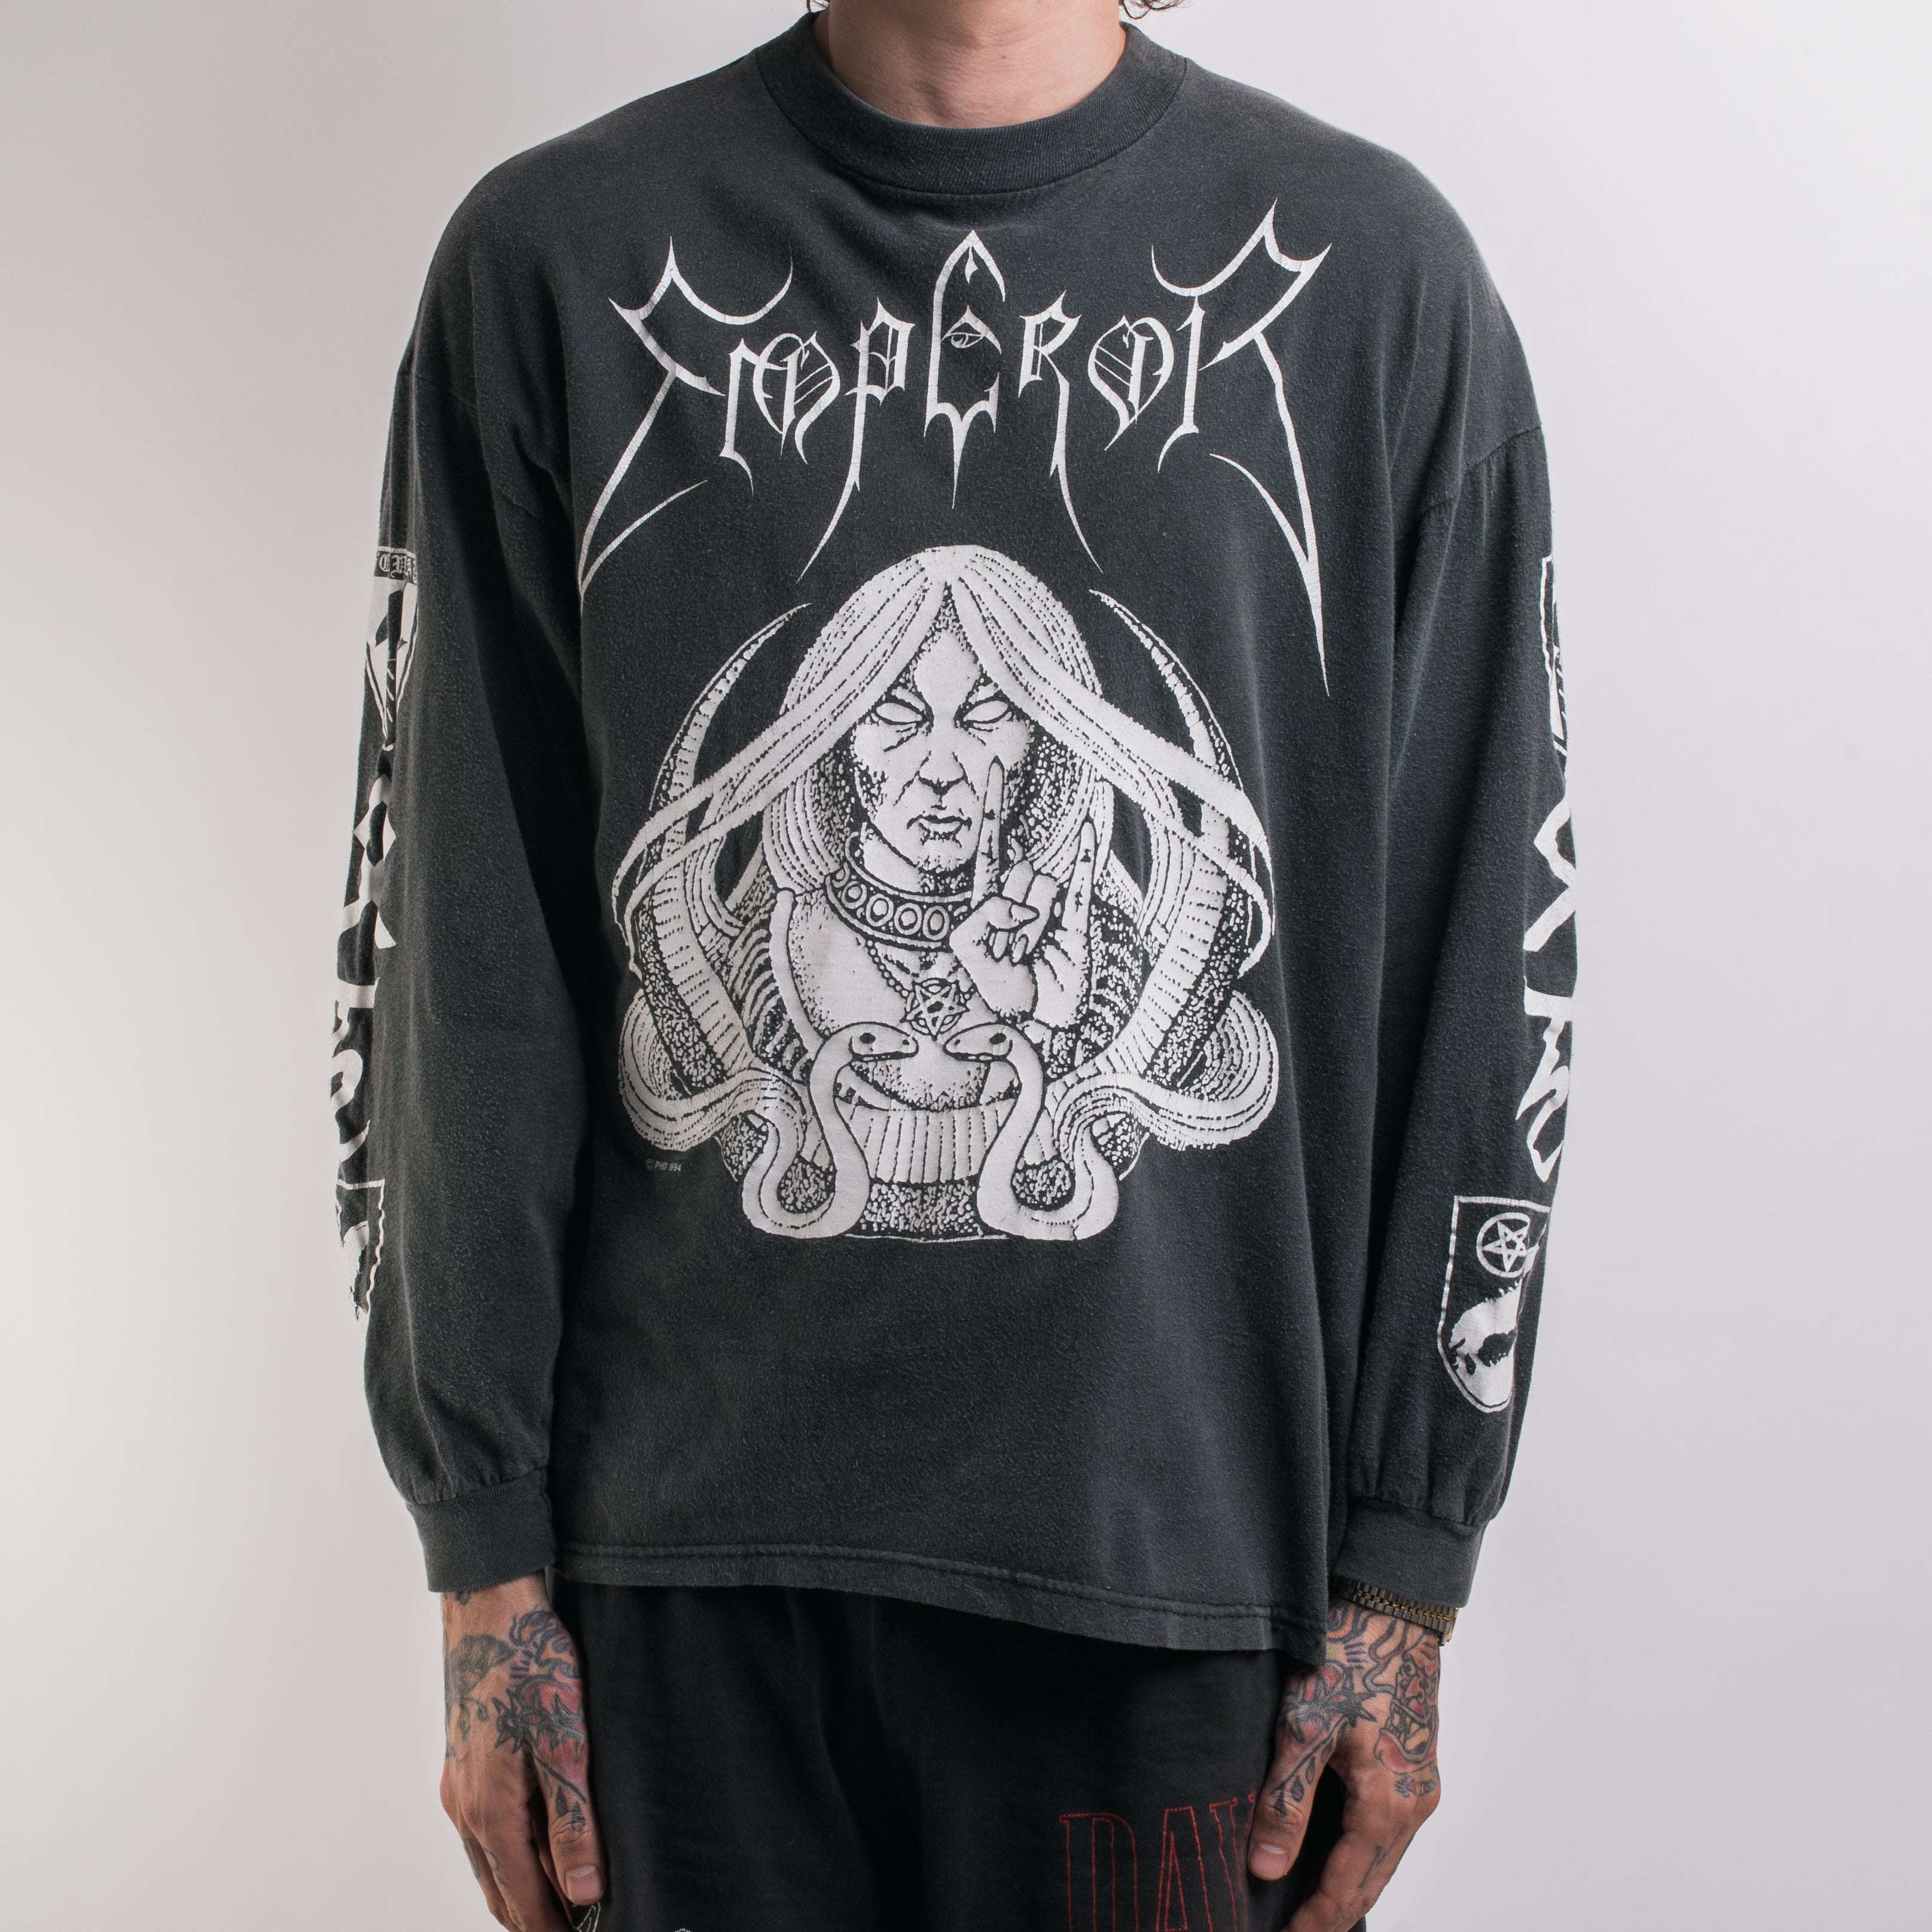 Vintage 1994 Emperor Into the Mills Vintage Thoughts Longsleeve – USA of Infinity